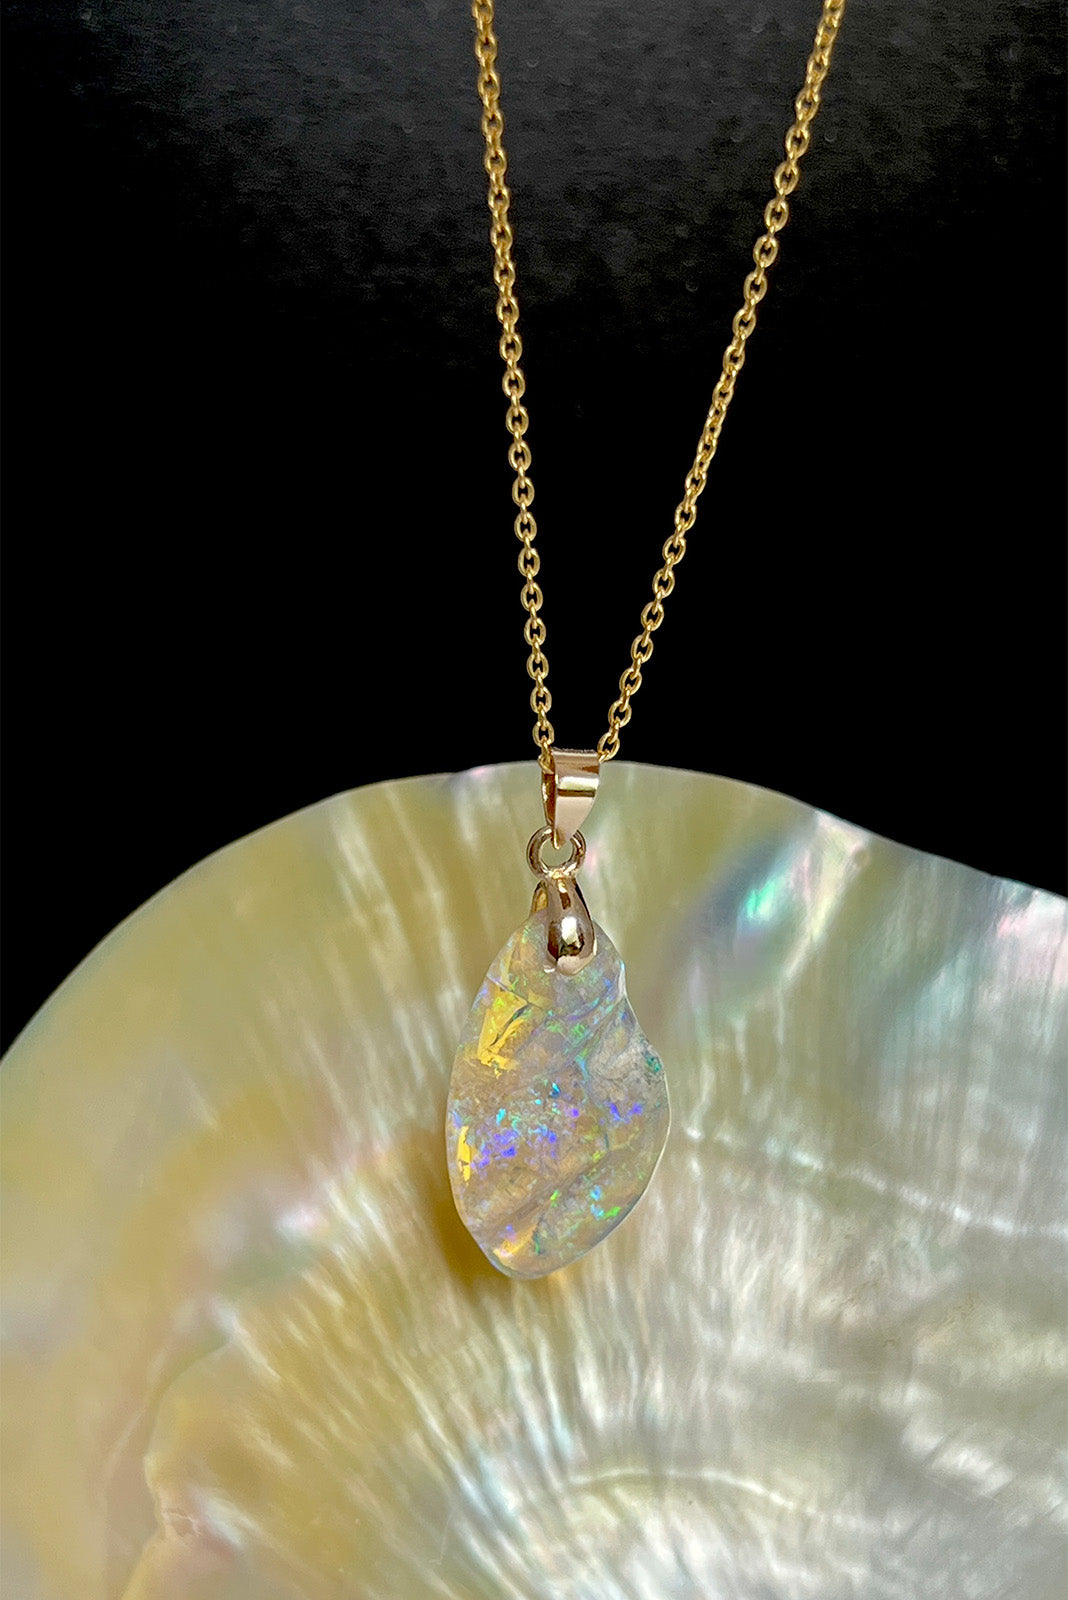 Retro 14kt Floating Opal Ball Necklace – A. Brandt + Son